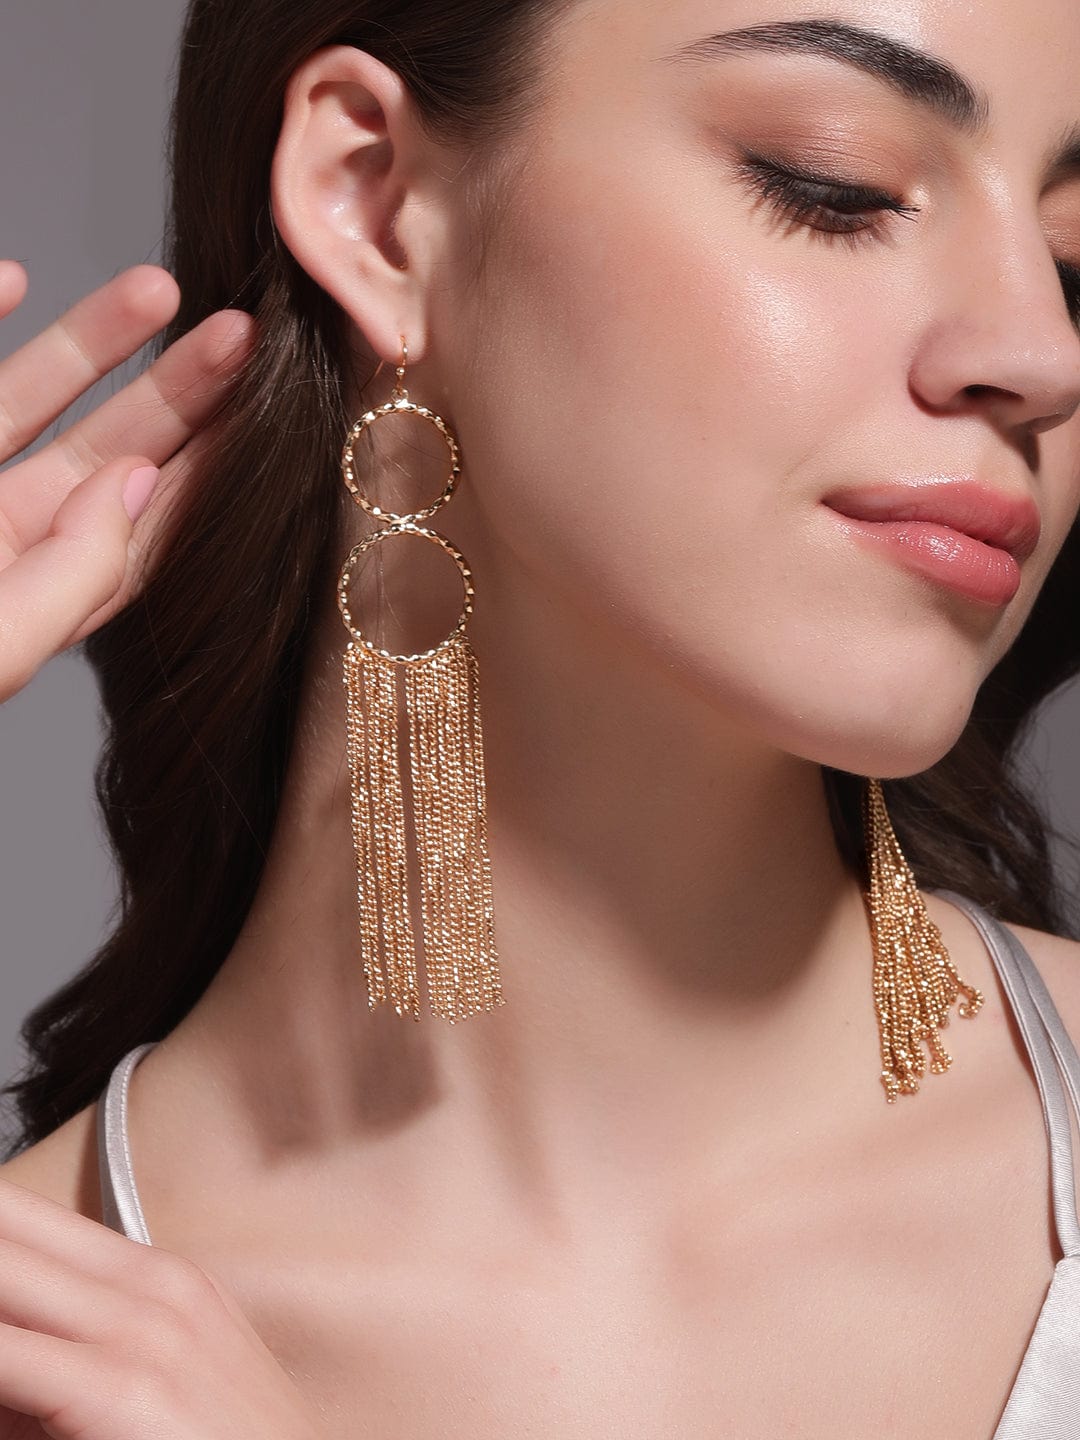 Rubans Voguish 18K Gold plated Textured Wired Tassle Statement Earring Earrings